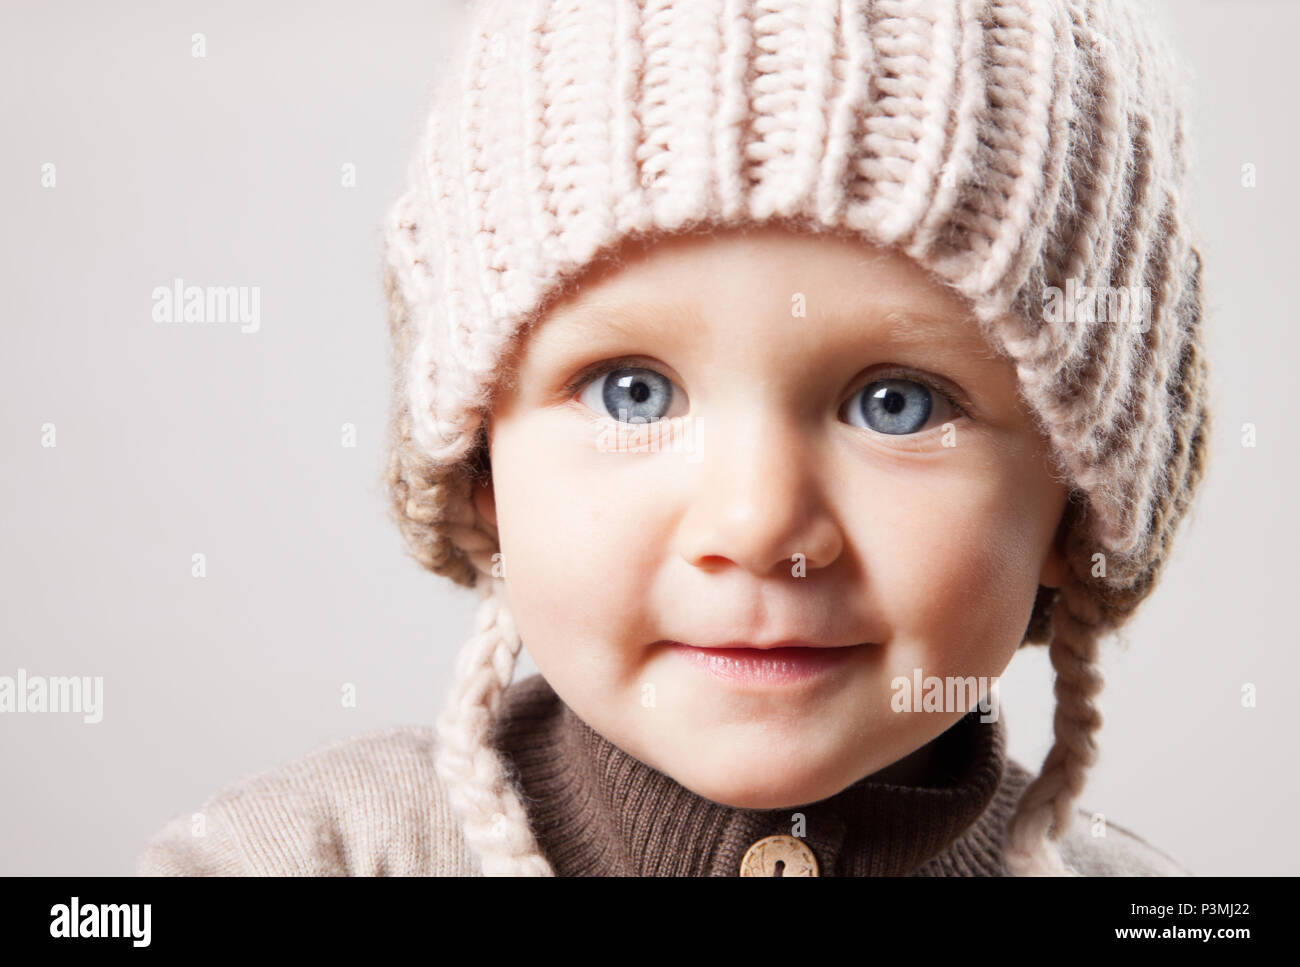 Portrait of a cute baby girl in a huge brown knitted hat. Isolated on white background. Stock Photo